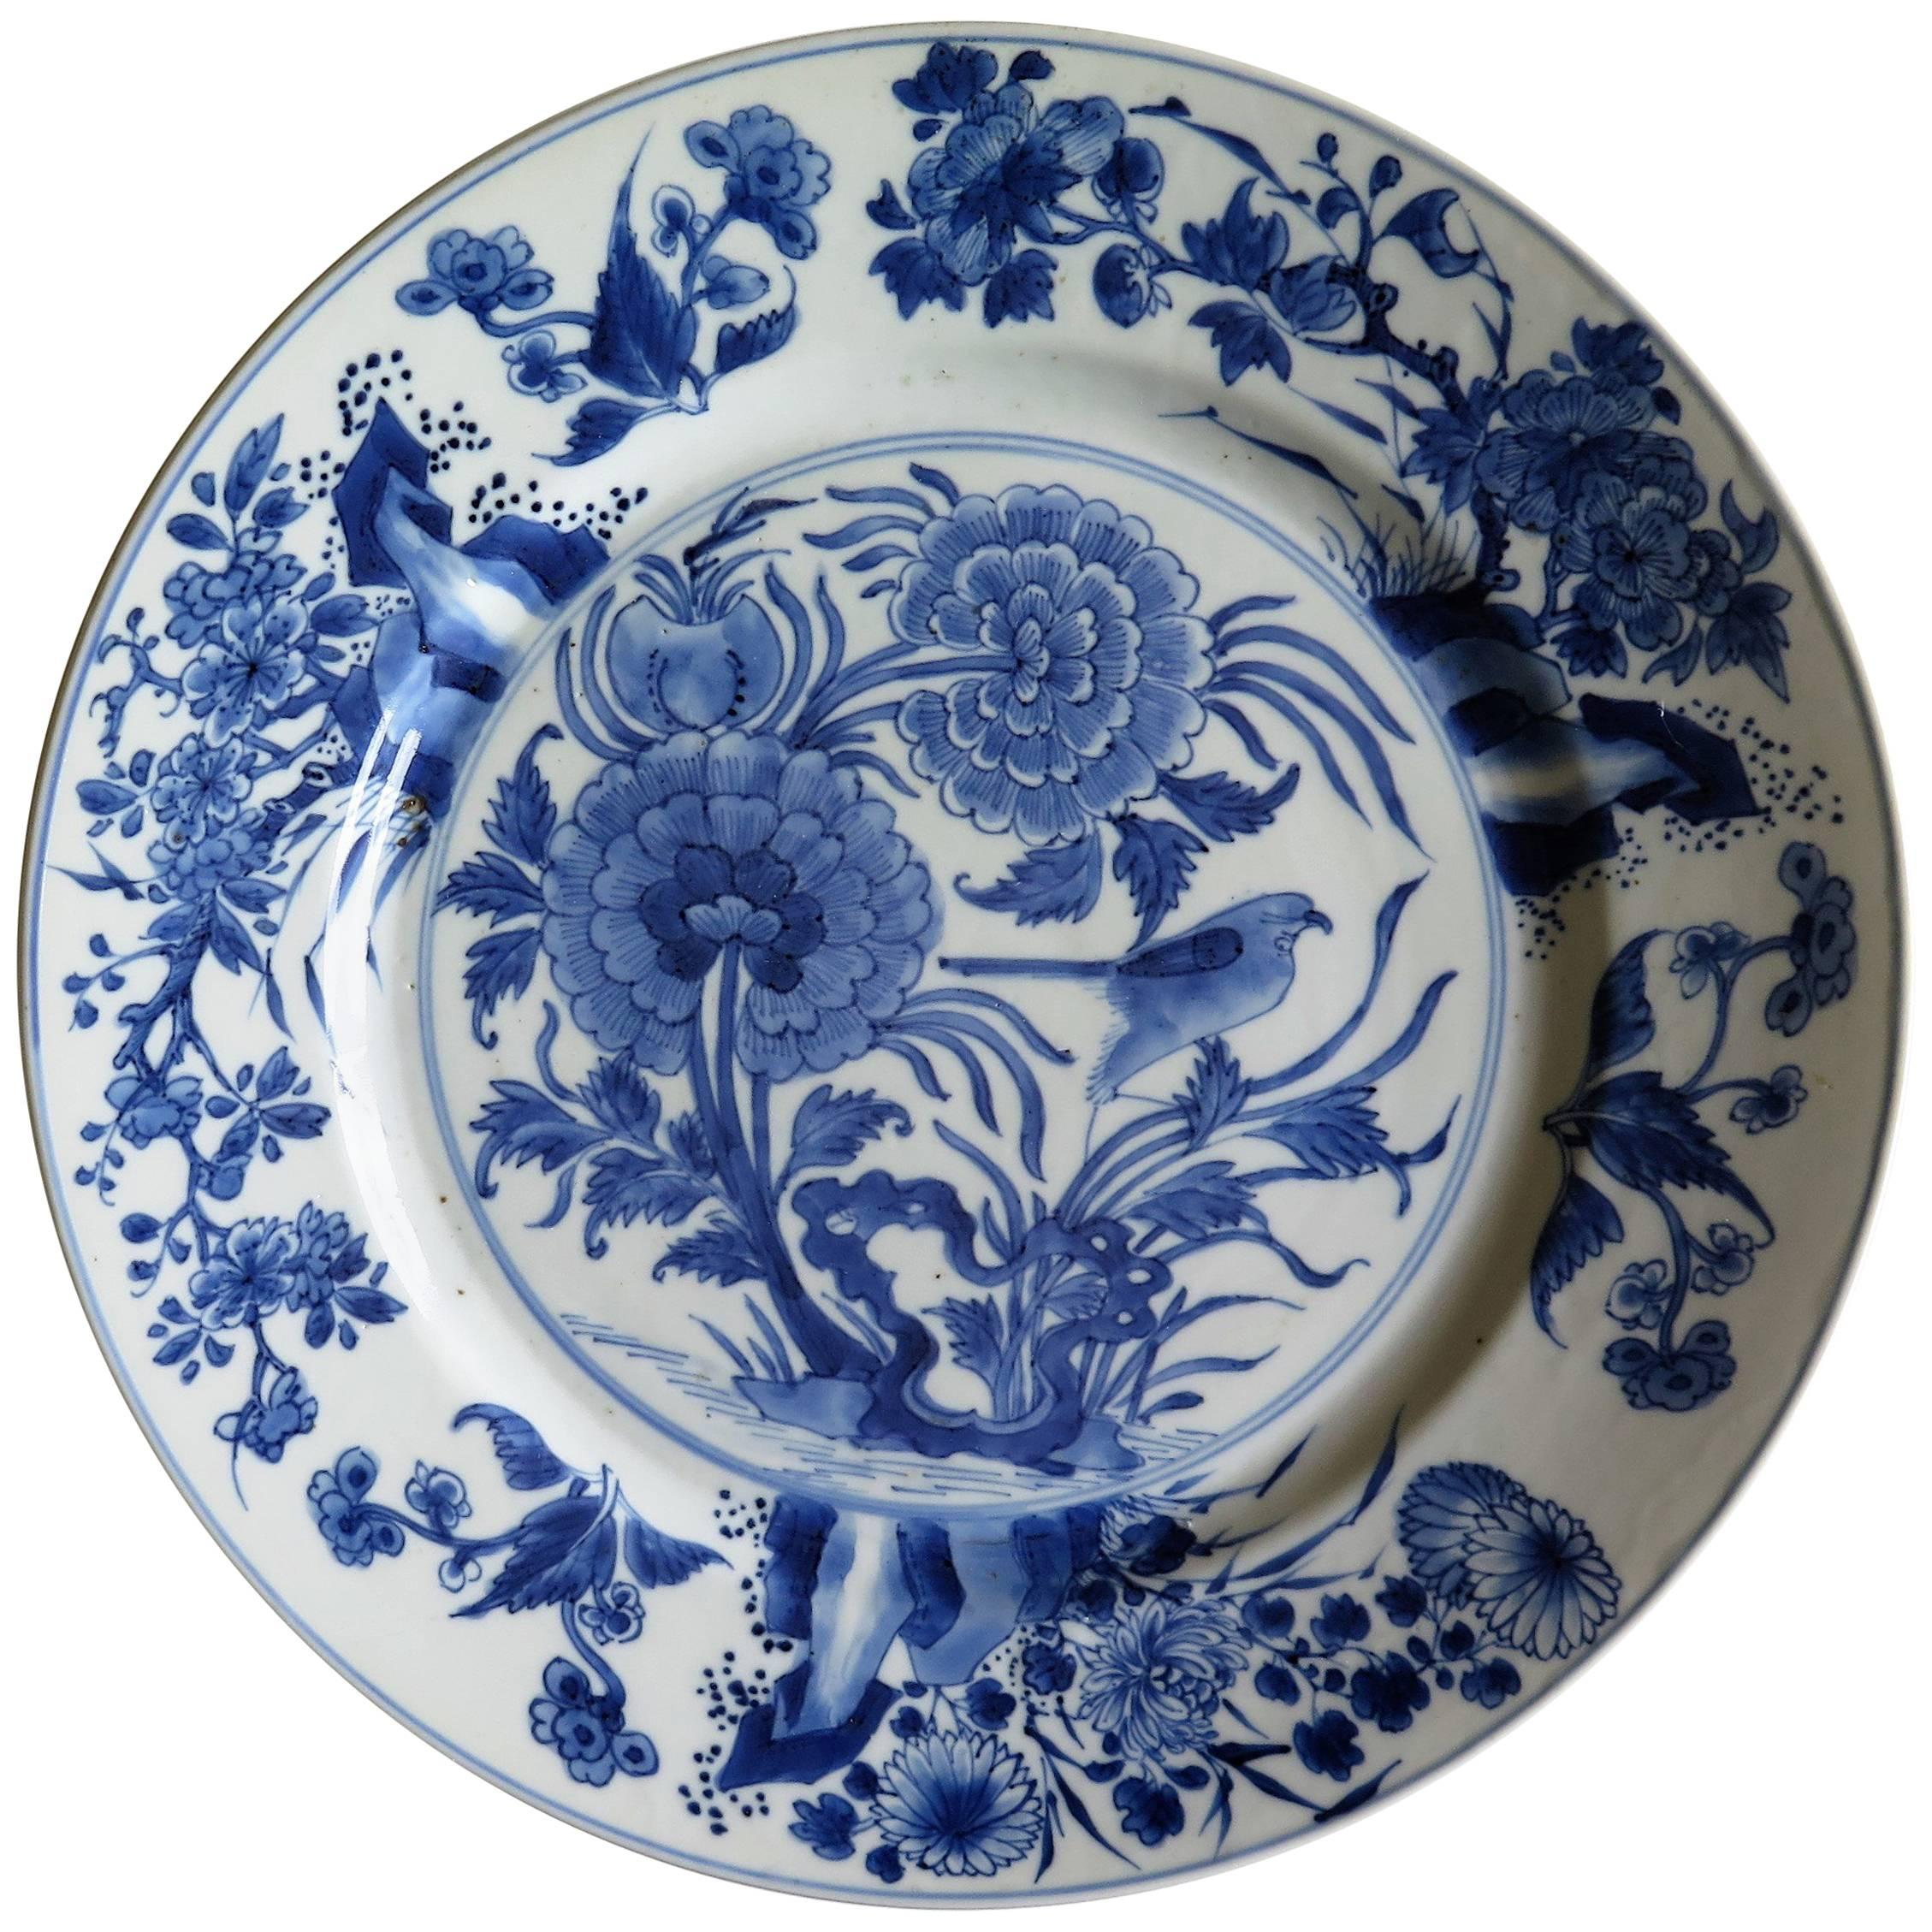 Fine Chinese Porcelain Blue and White Plate, Kangxi Period and Mark Circa 1700